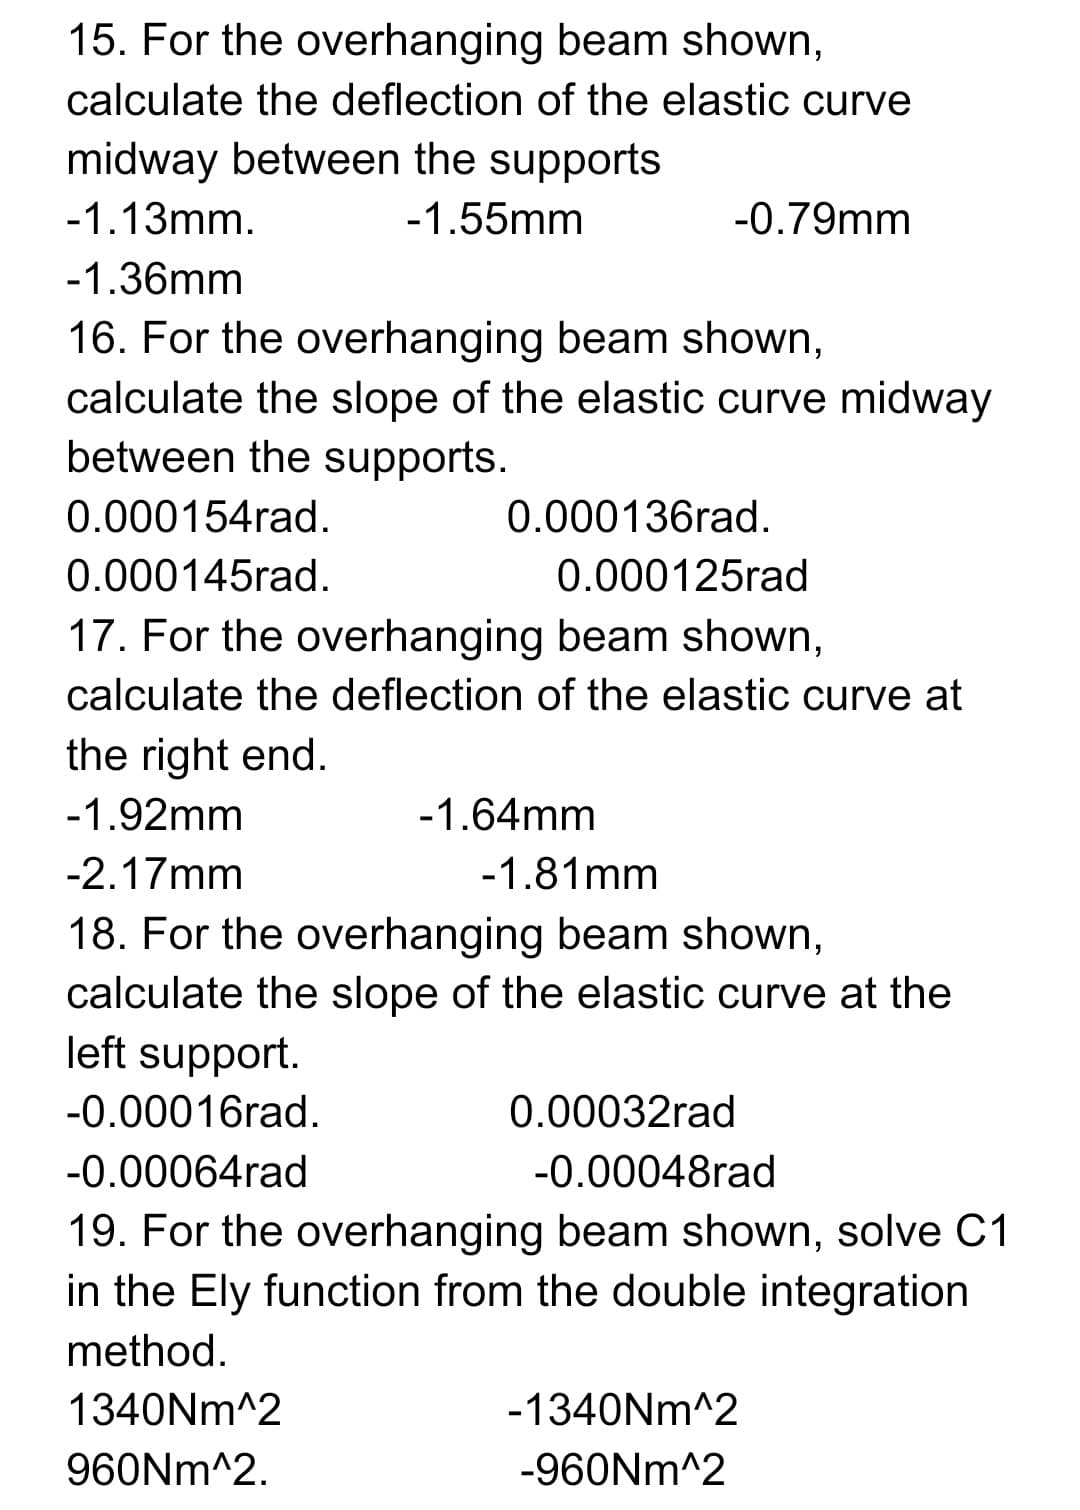 15. For the overhanging beam shown,
calculate the deflection of the elastic curve
midway between the supports
-1.13mm.
-1.55mm
-0.79mm
-1.36mm
16. For the overhanging beam shown,
calculate the slope of the elastic curve midway
between the supports.
0.000154rad.
0.000136rad.
0.000145rad.
0.000125rad
17. For the overhanging beam shown,
calculate the deflection of the elastic curve at
the right end.
-1.92mm
-1.64mm
-2.17mm
-1.81mm
18. For the overhanging beam shown,
calculate the slope of the elastic curve at the
left support.
-0.00016rad.
0.00032rad
-0.00064rad
-0.00048rad
19. For the overhanging beam shown, solve C1
in the Ely function from the double integration
method.
1340NM^2
-1340NM^2
960NM^2.
-960NM^2
